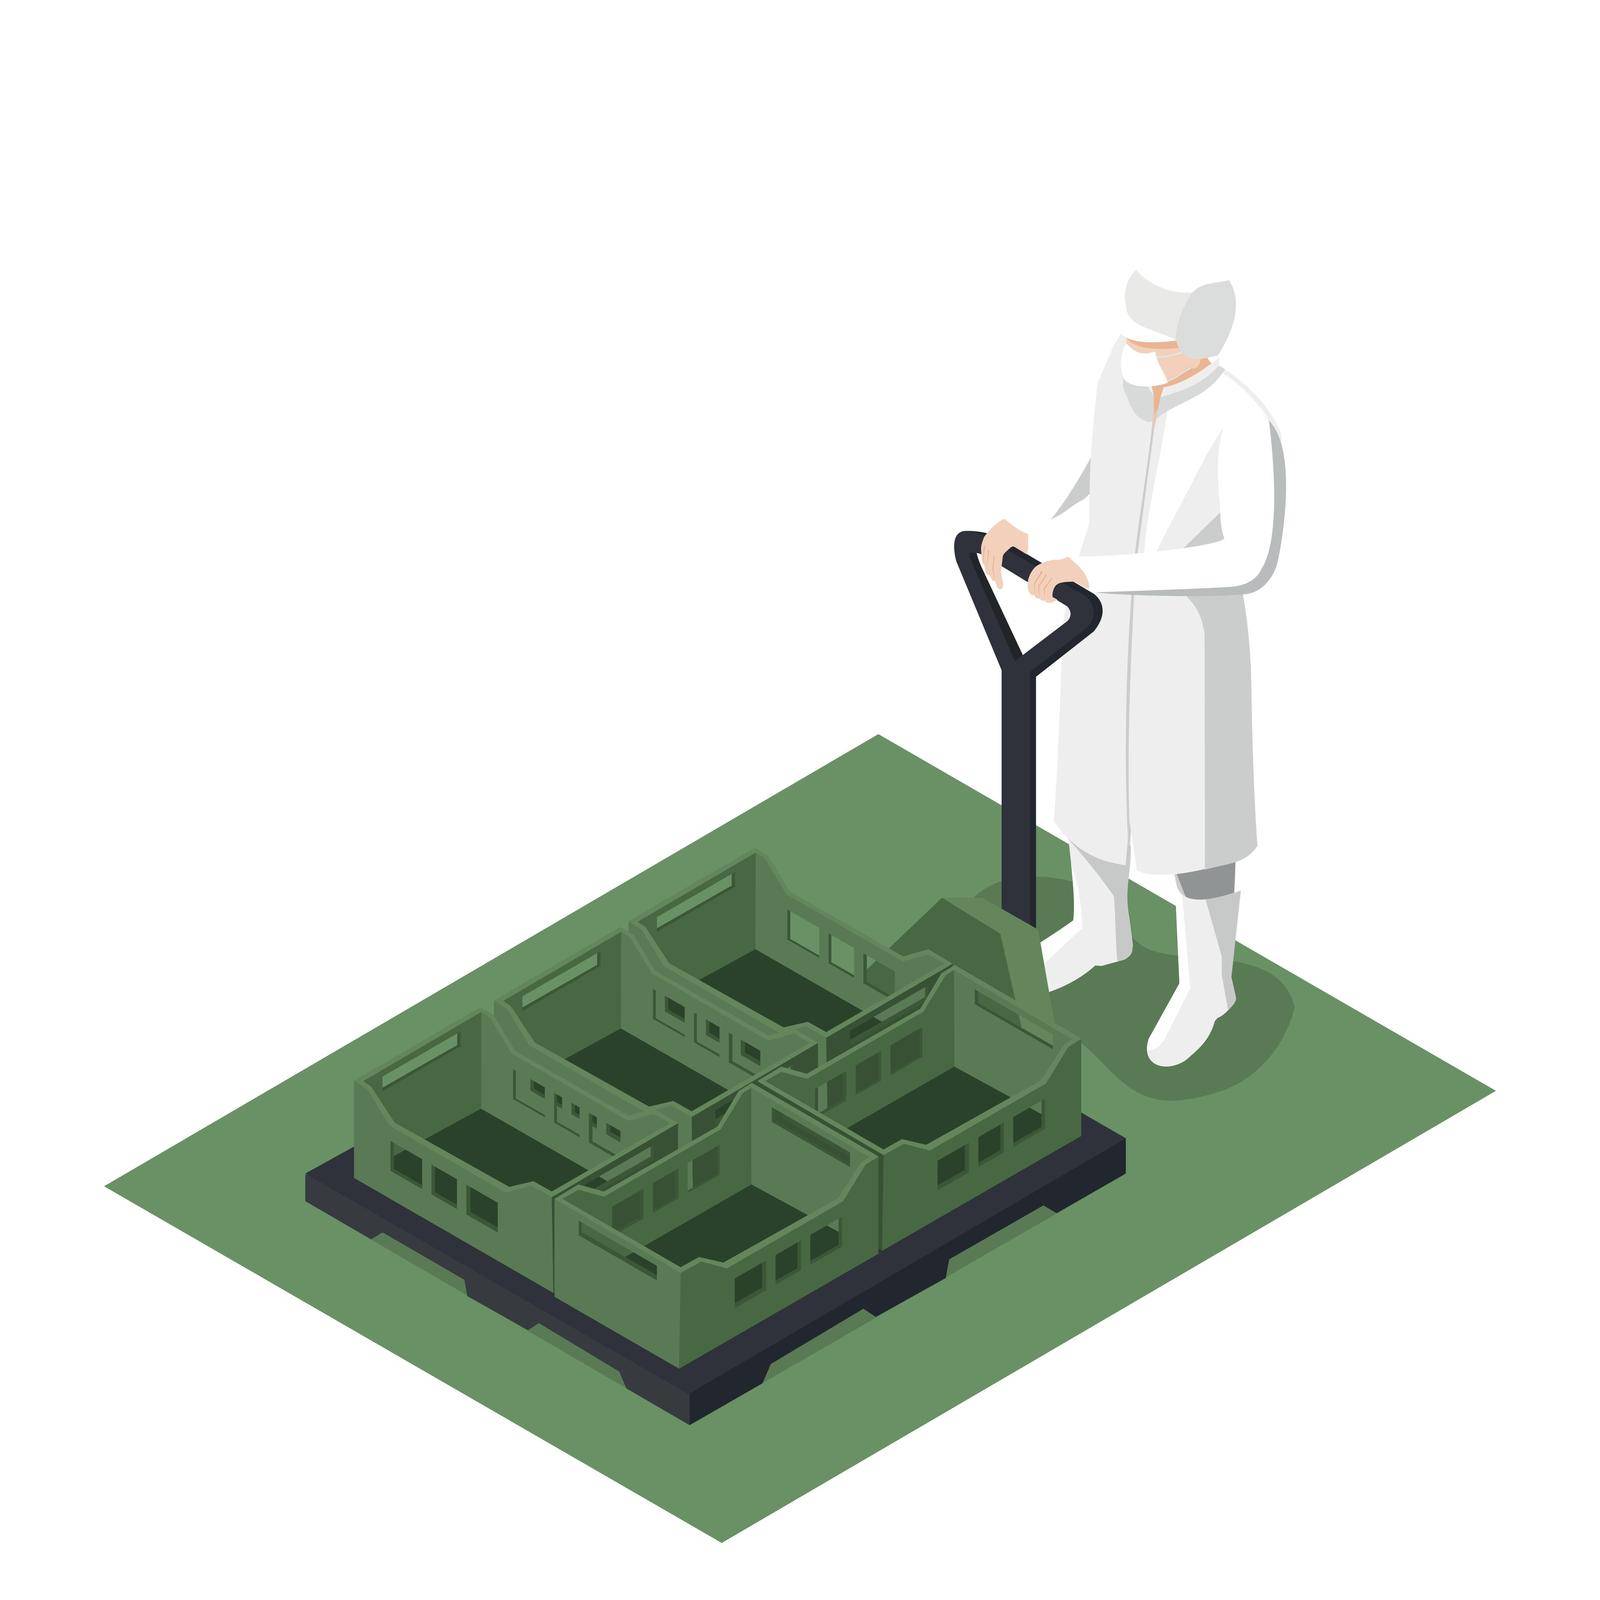 Worker using an isometric manual forklift by Ipajoel